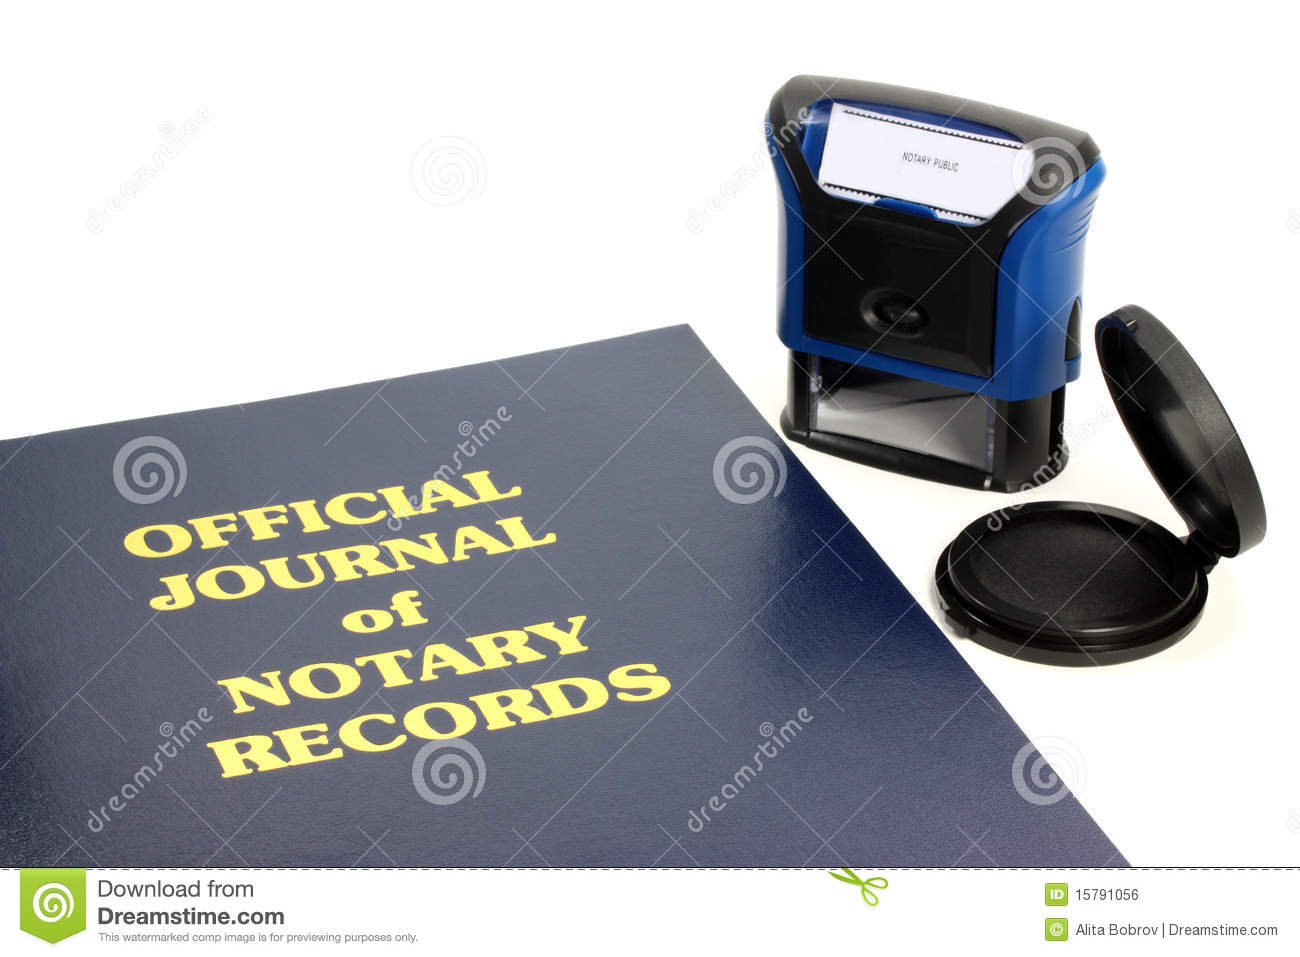 Notary Journal Royalty Free Stock Image   Image  15791056